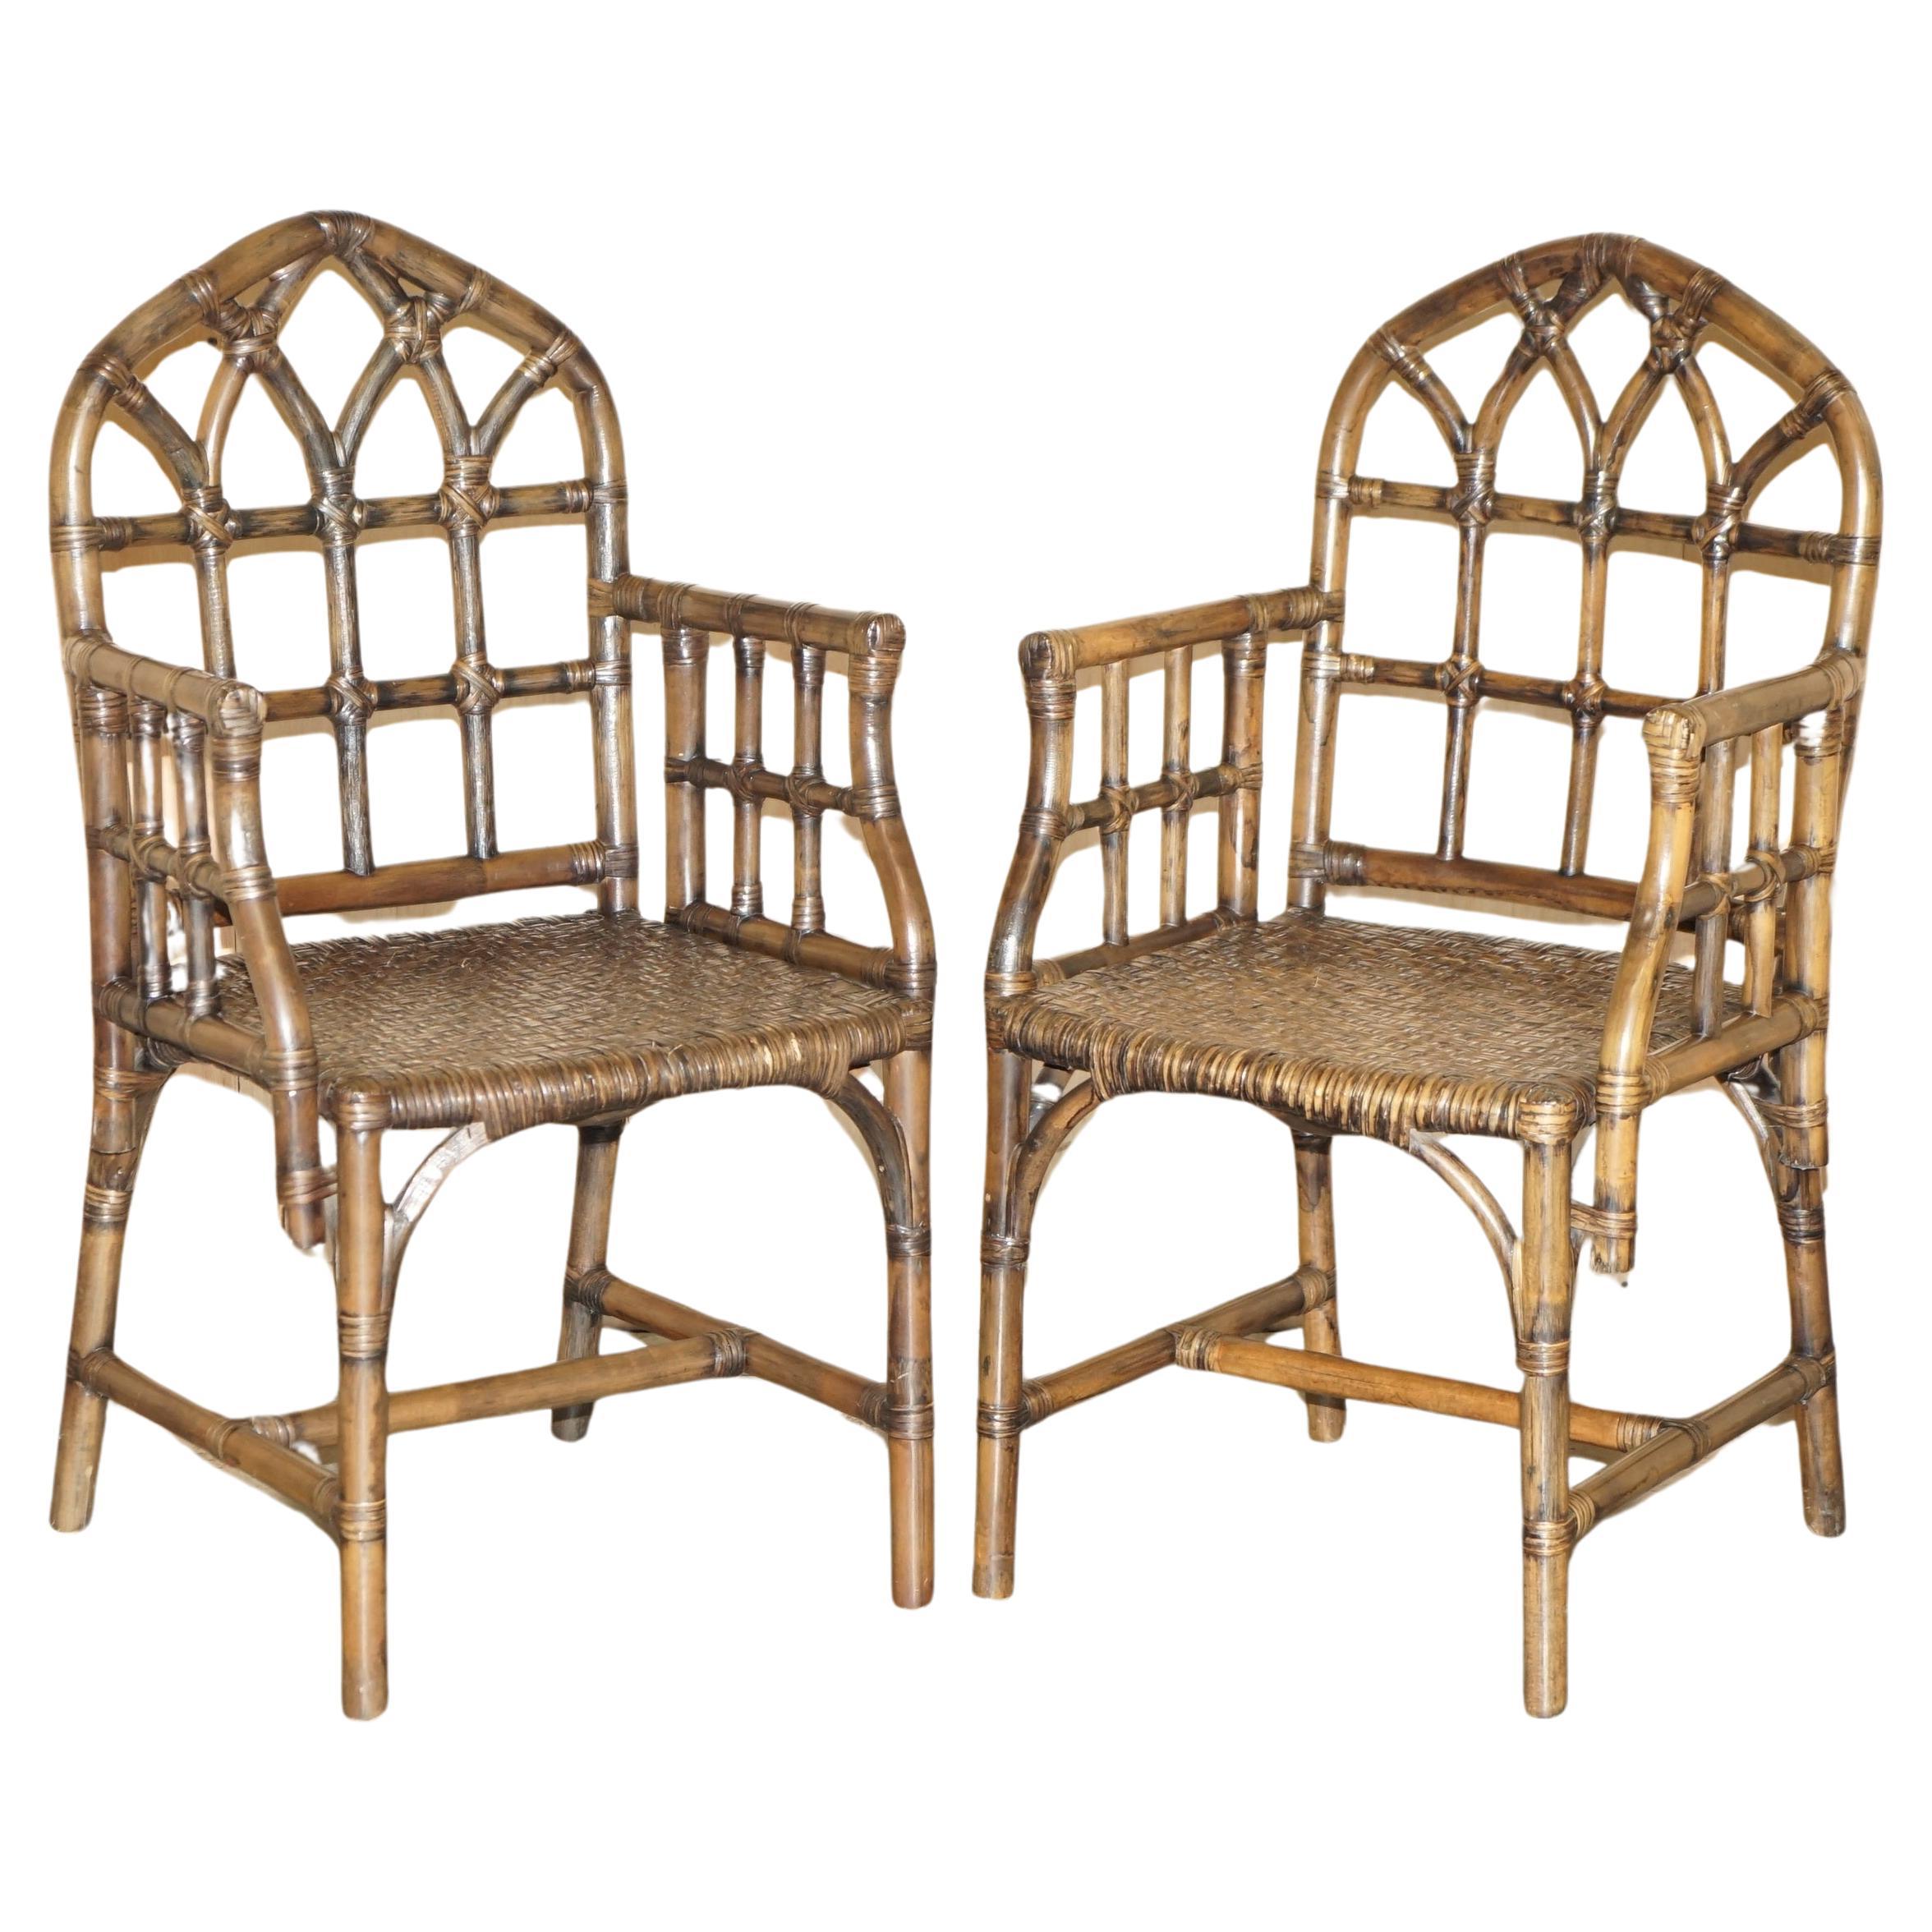 EXQUISITE PAIR OF MID CENTURY MCGUIRE RATTAN GOTHIC CATHEDRAL BACK ARMCHAIRs For Sale